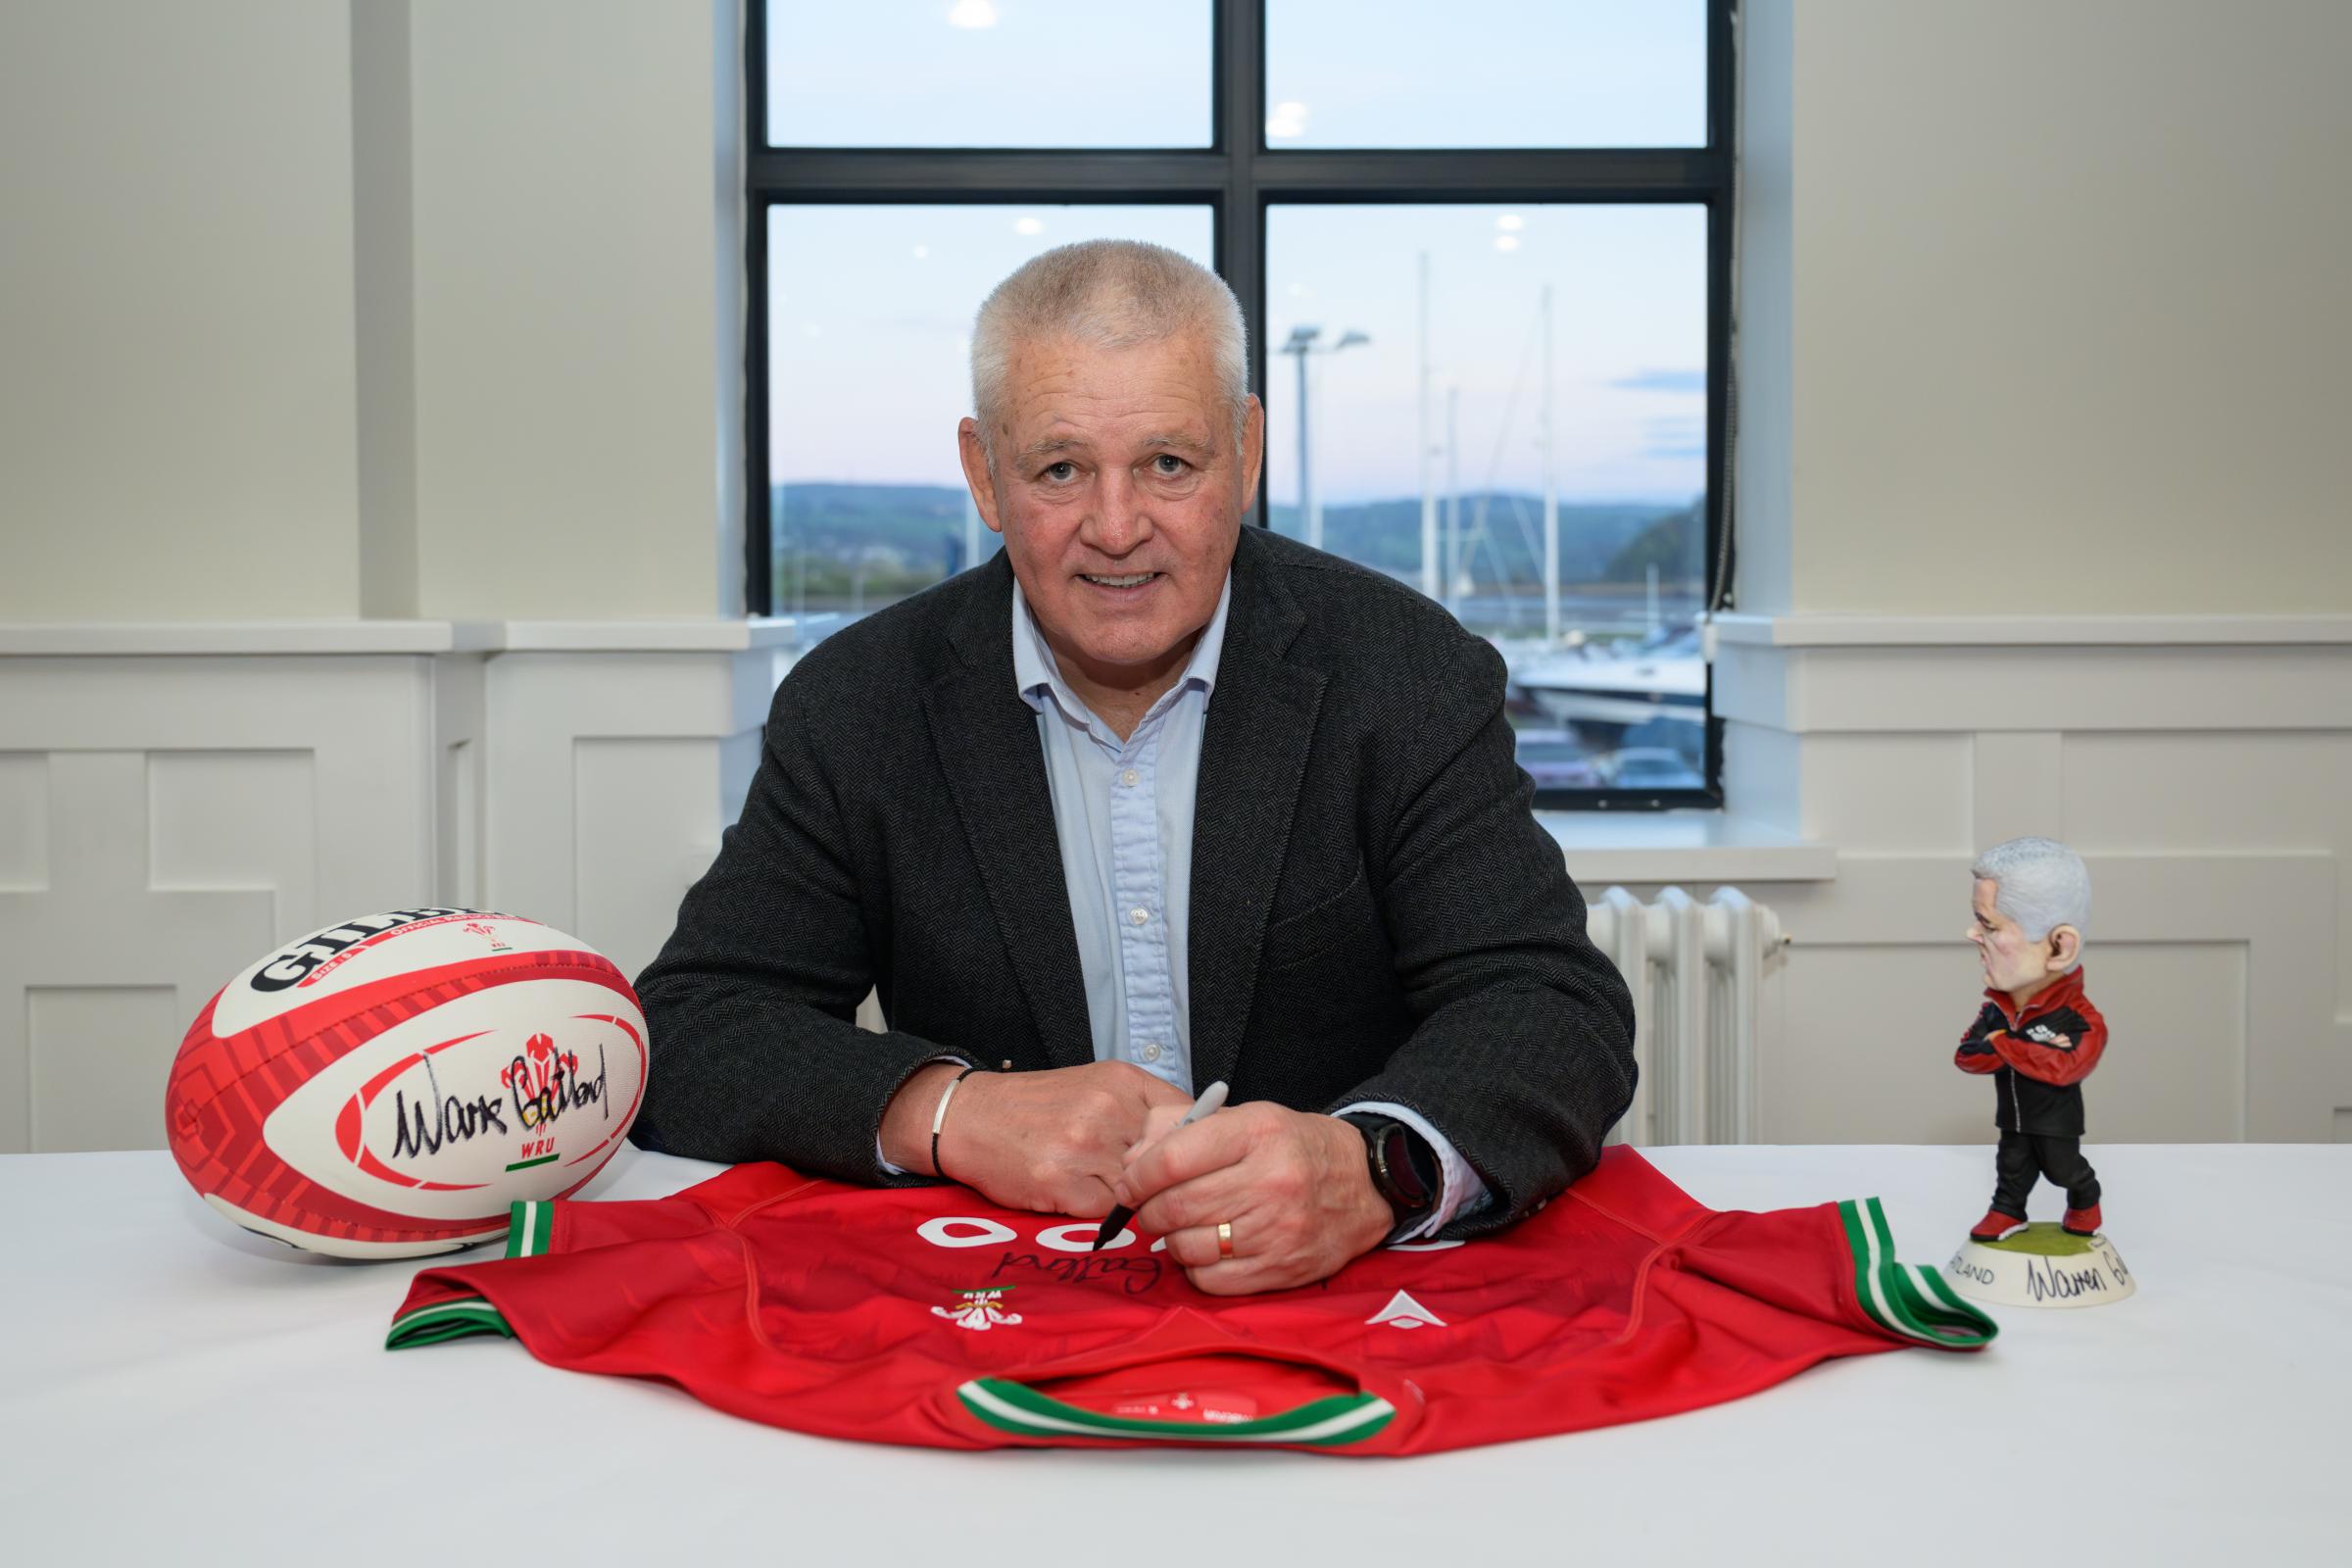 Warren Gatland signs auction items at the Deganwy Quay Hotel